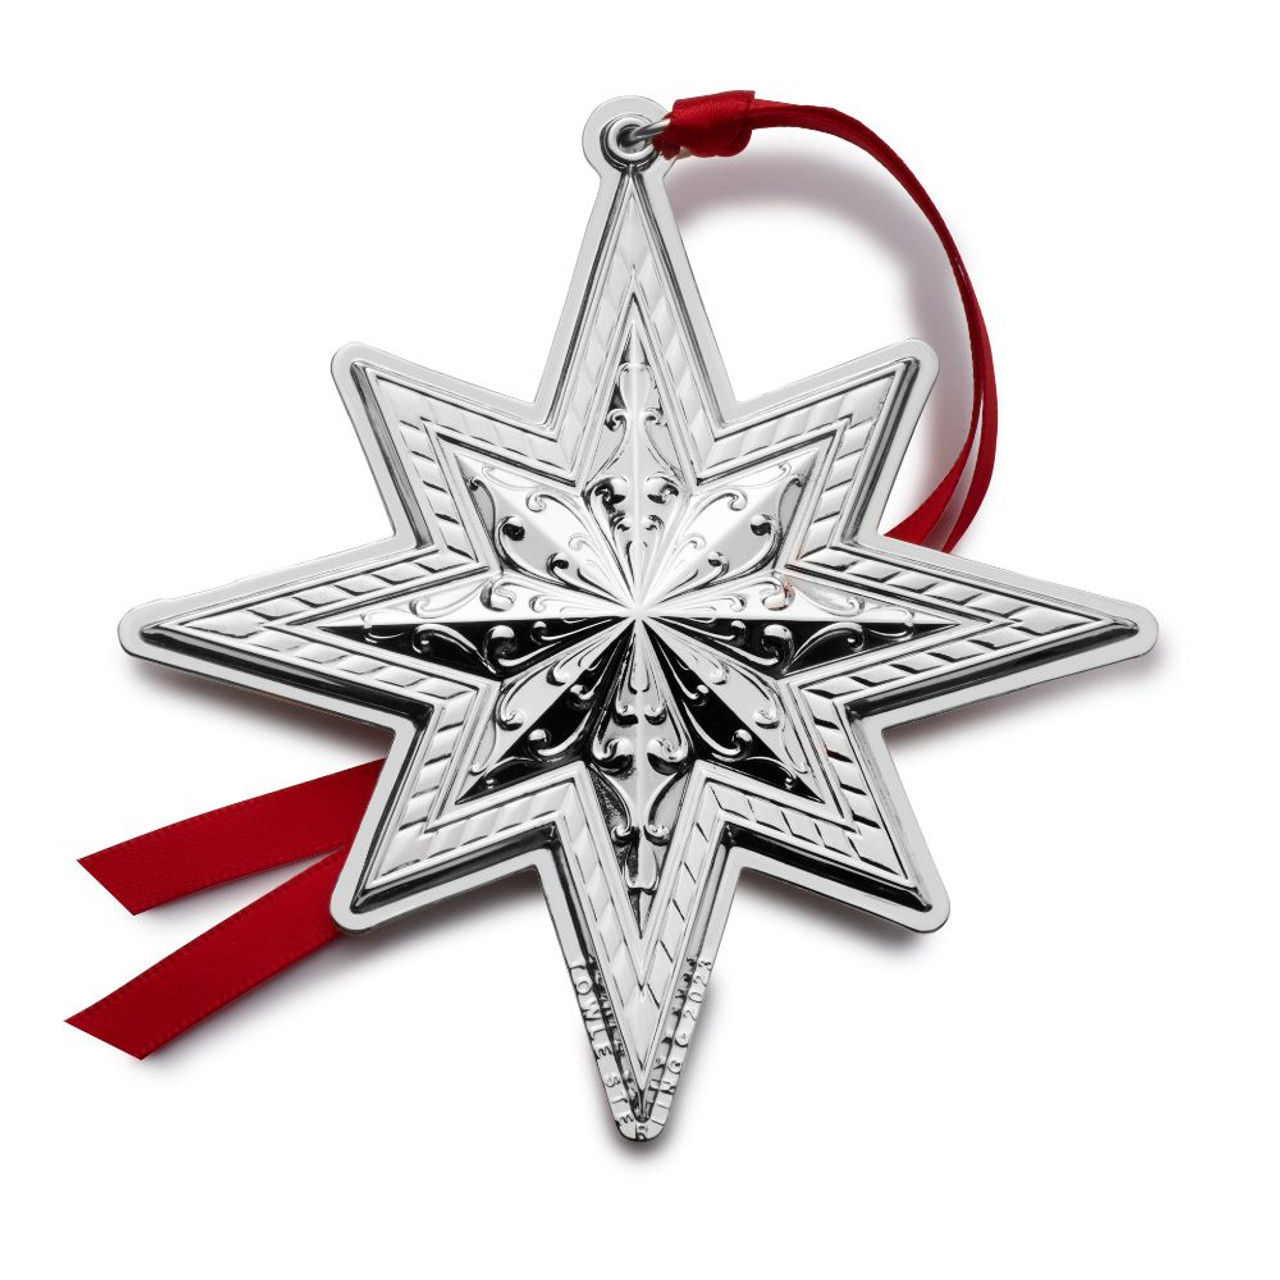 https://cdn11.bigcommerce.com/s-qv8xcg1pwn/images/stencil/1280x1280/products/5161/25880/Towle_2023_Sterling_Silver_Star_Ornament_-_27th_Edition__74590.1683891367.jpg?c=1